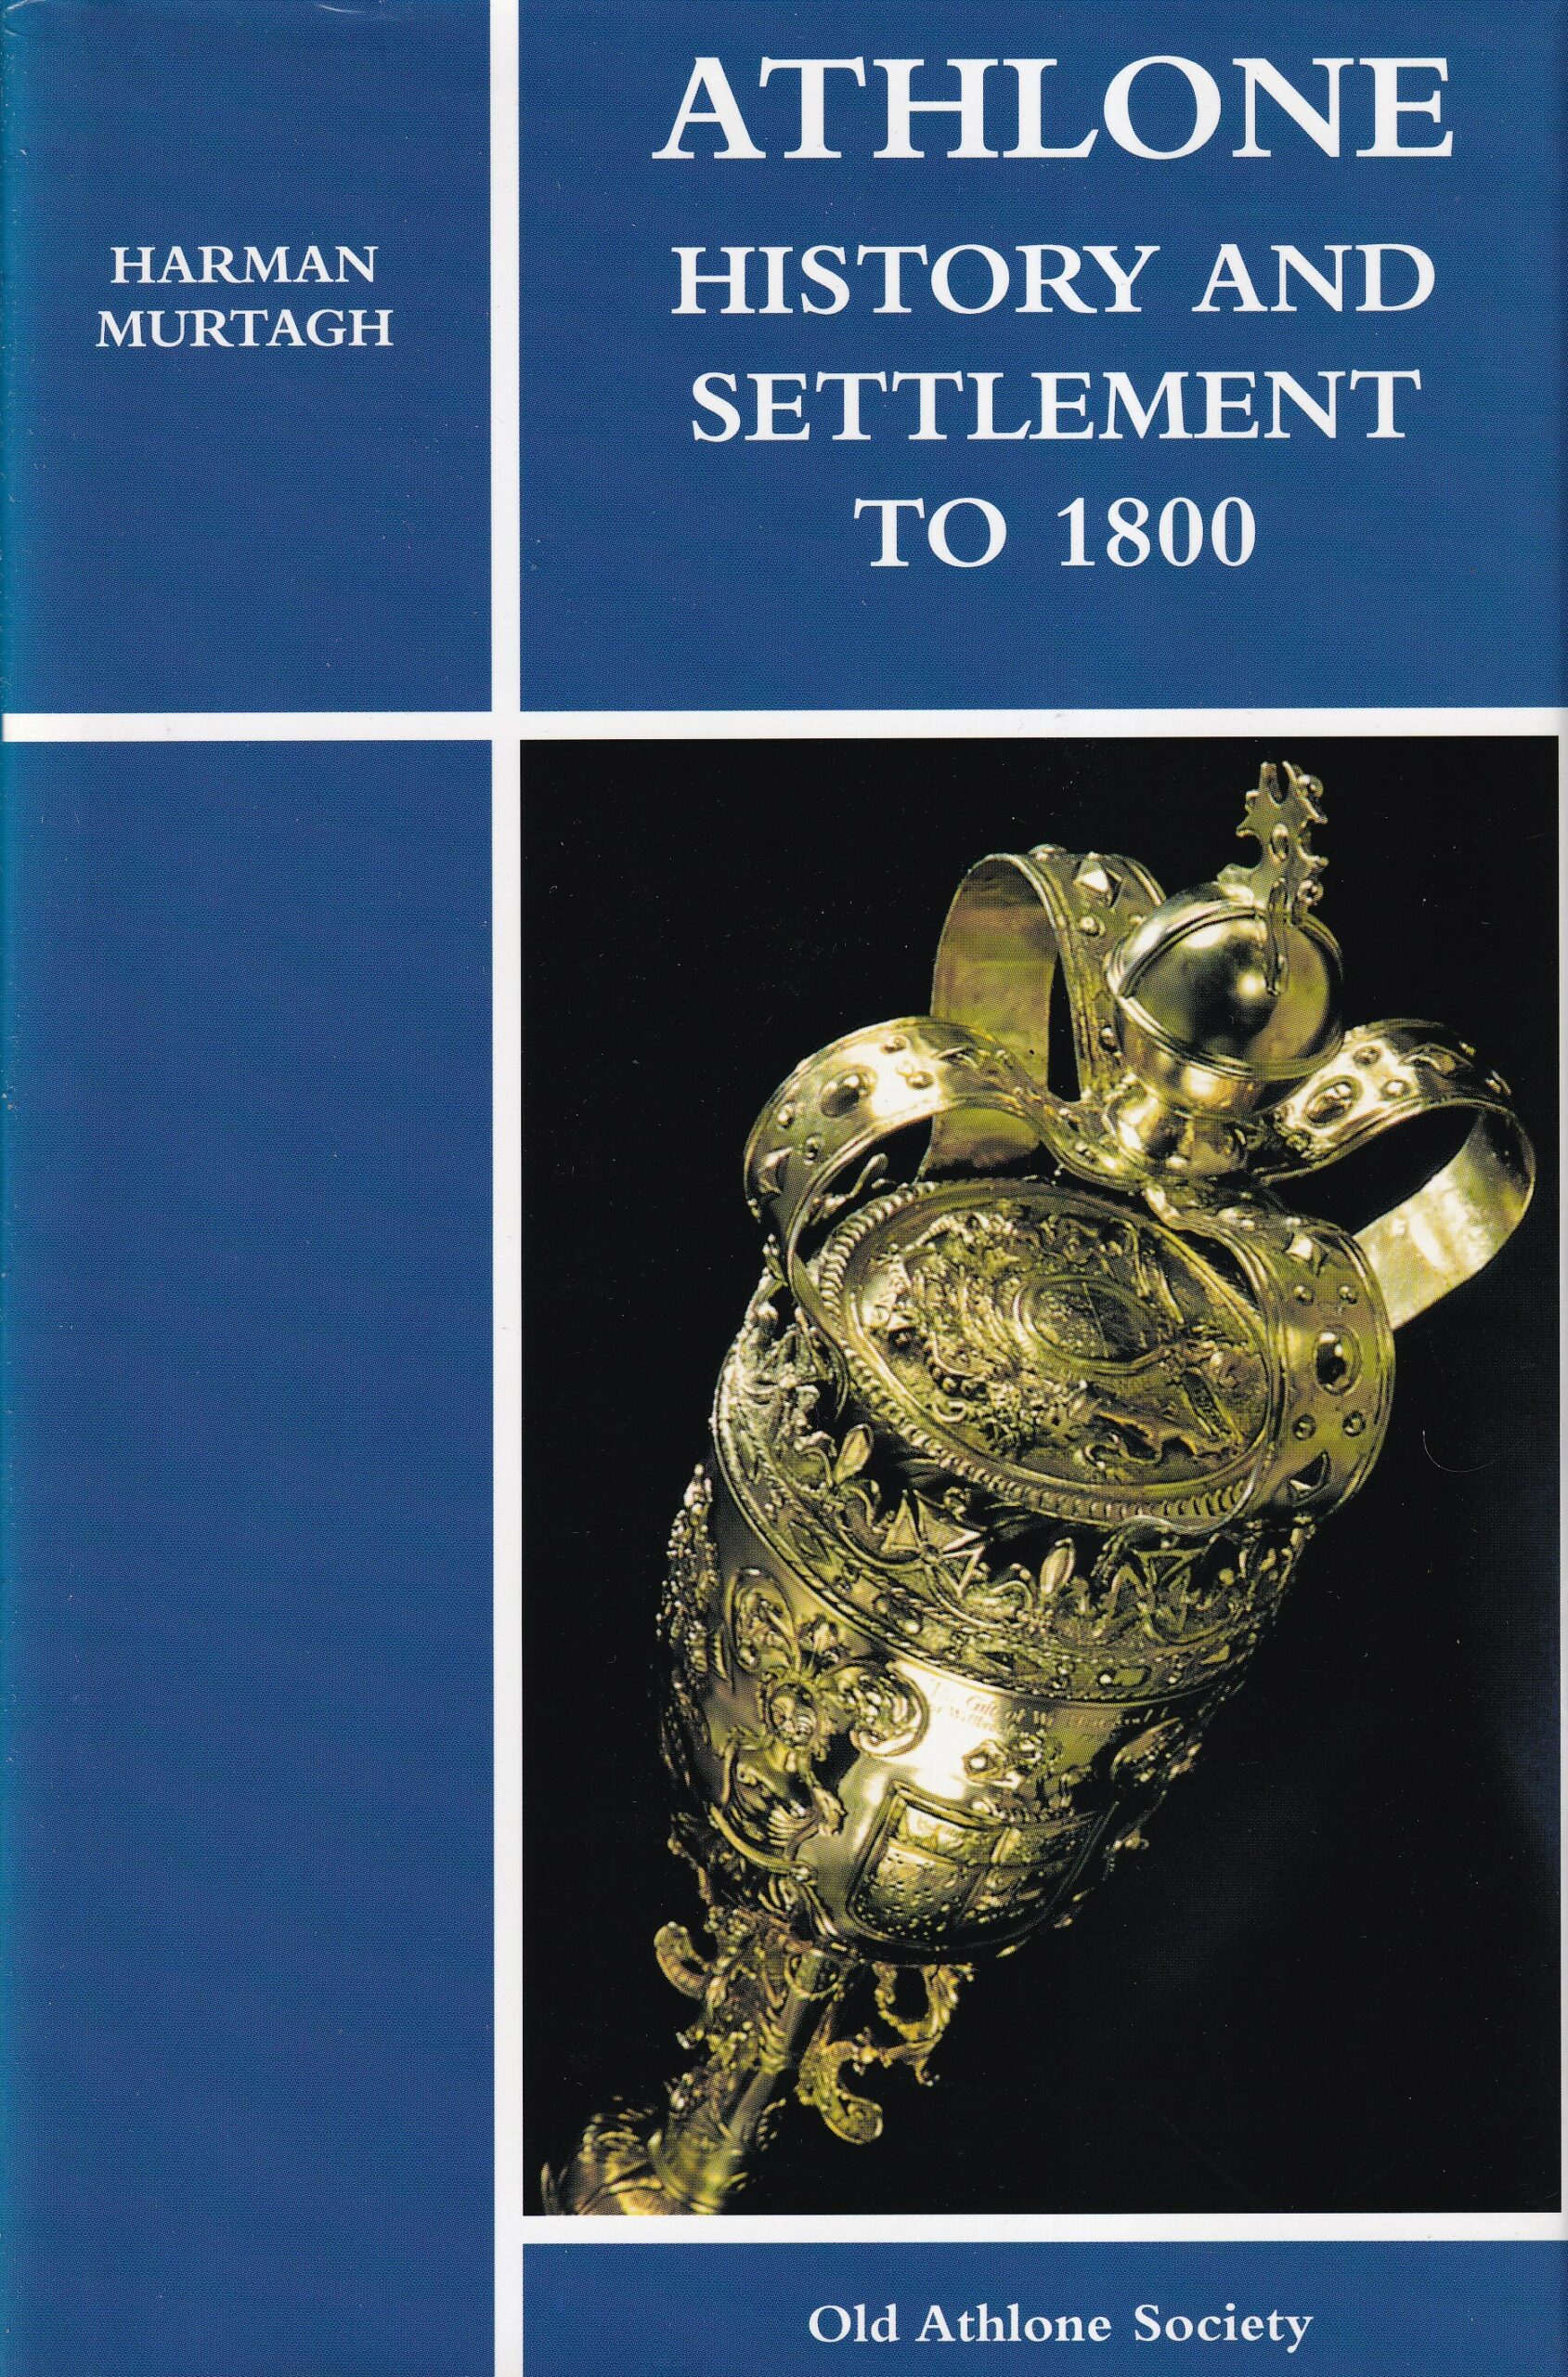 Athlone: History and Settlement to 1800 by Harman Murtagh